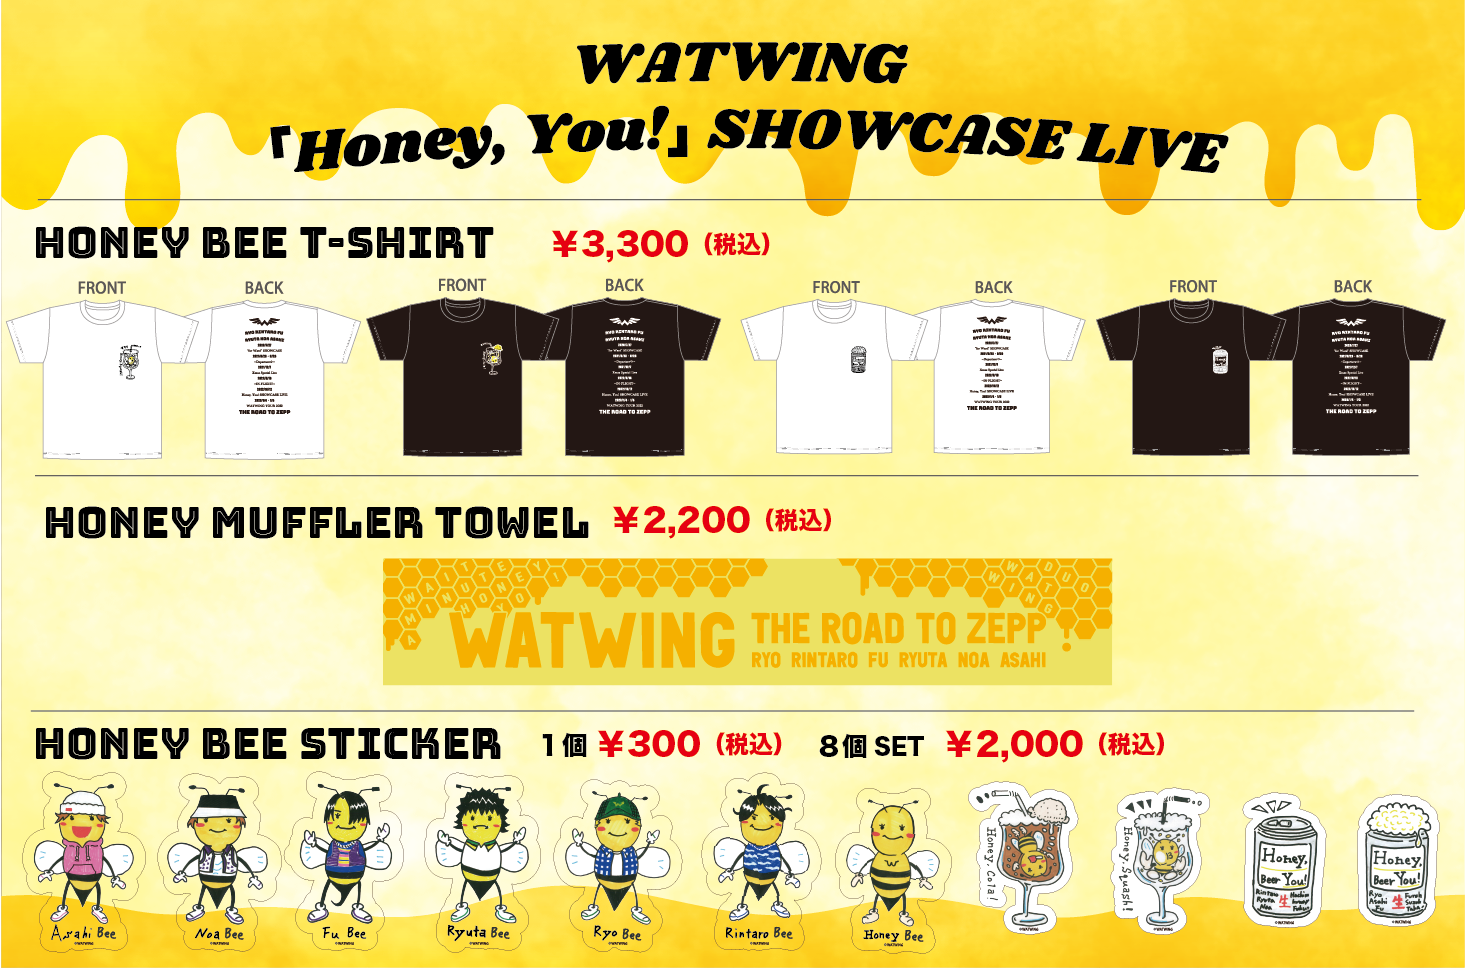 Watwing Honey You Showcase Live グッズ解禁 Watwing Official Site